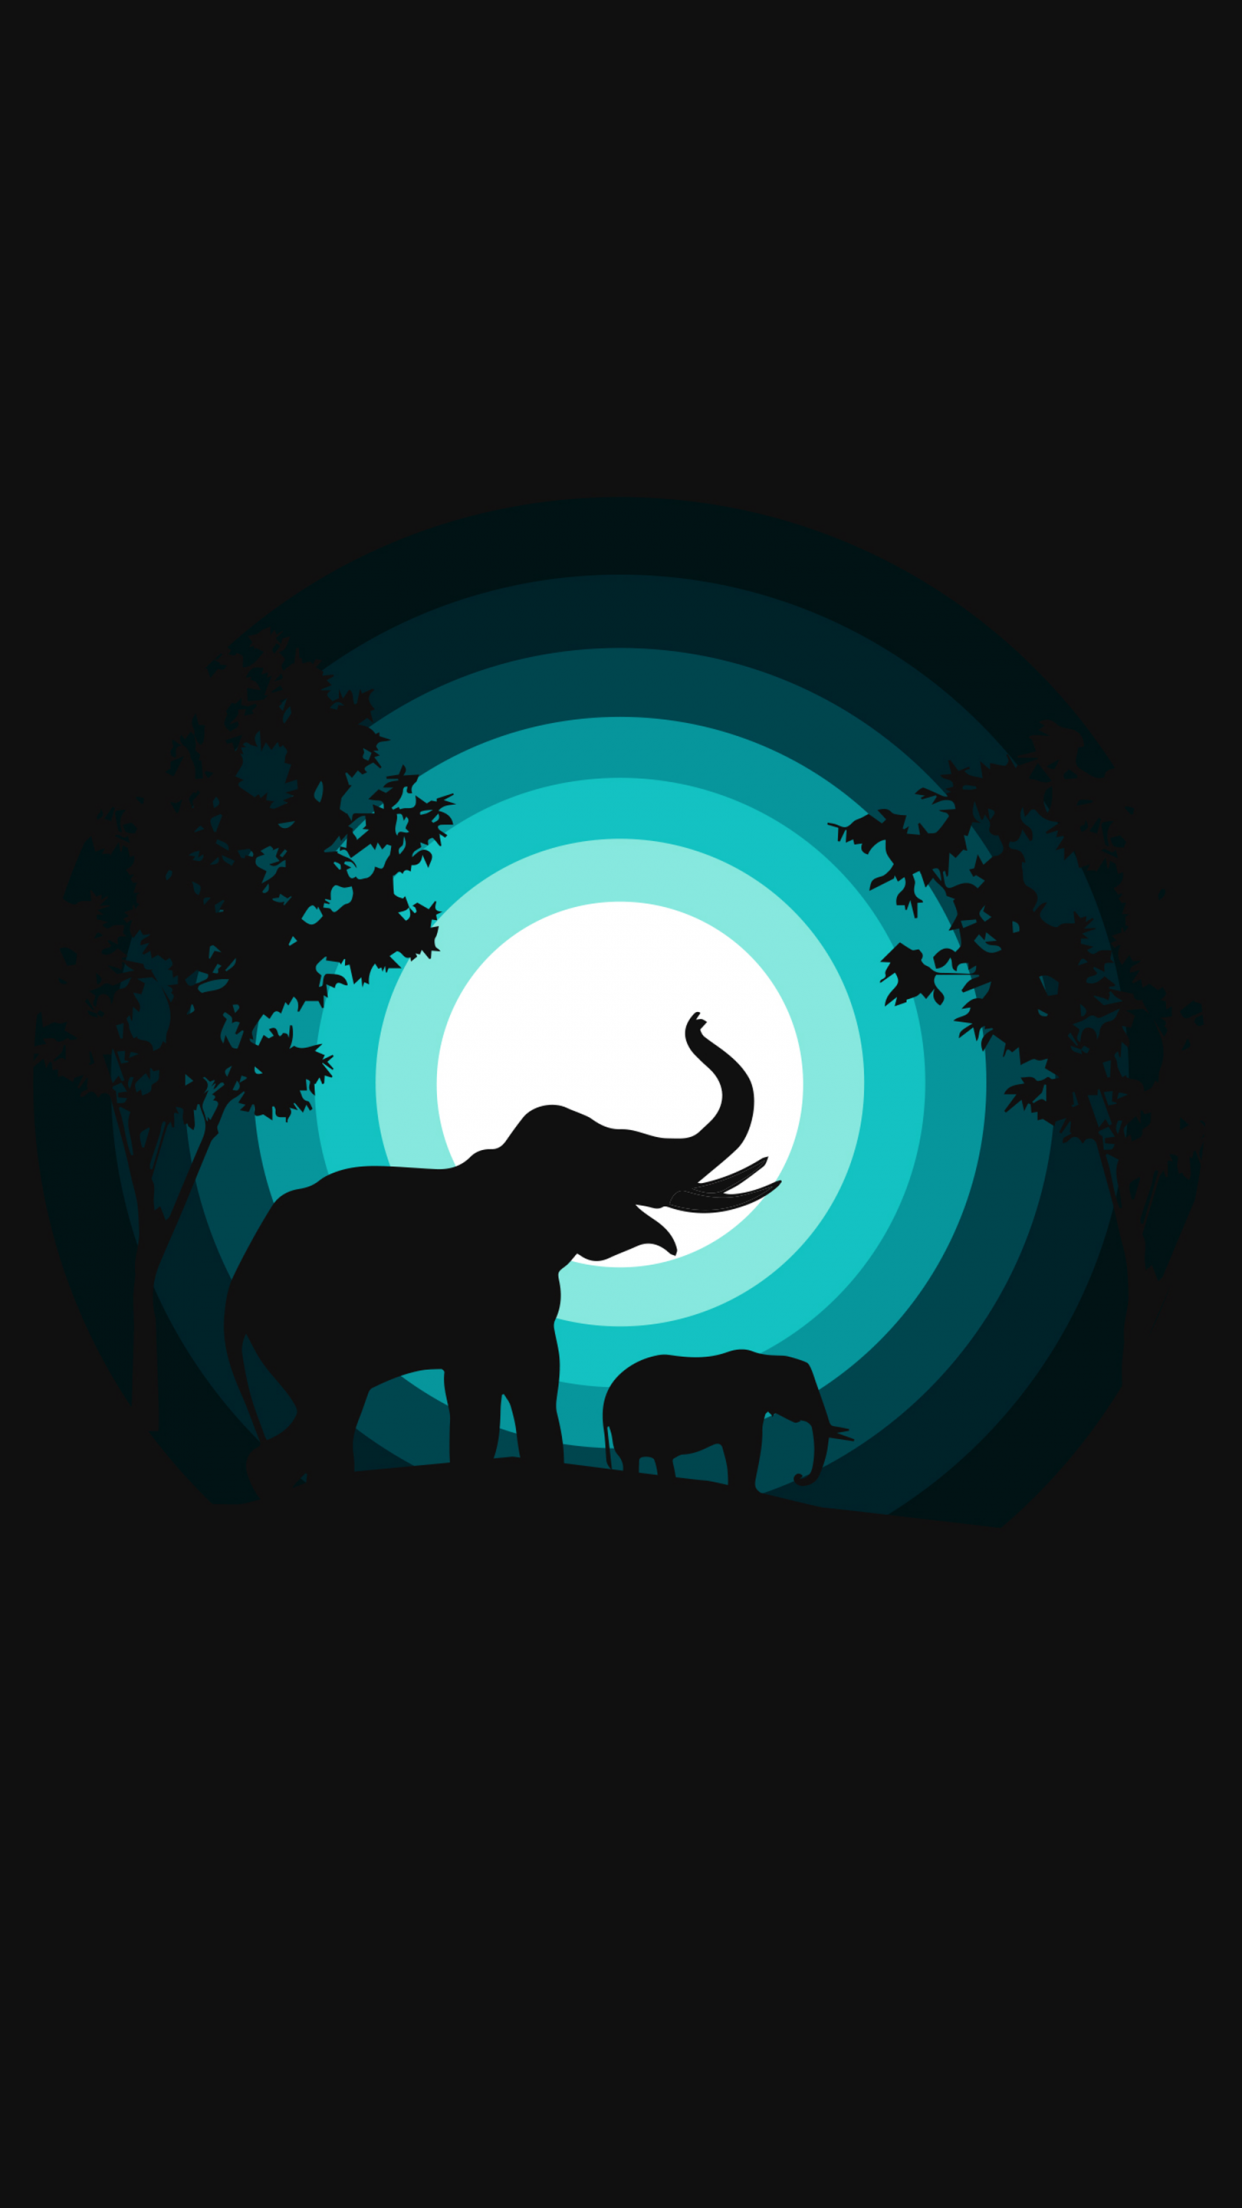 Elephant IPhone Wallpaper 74 images